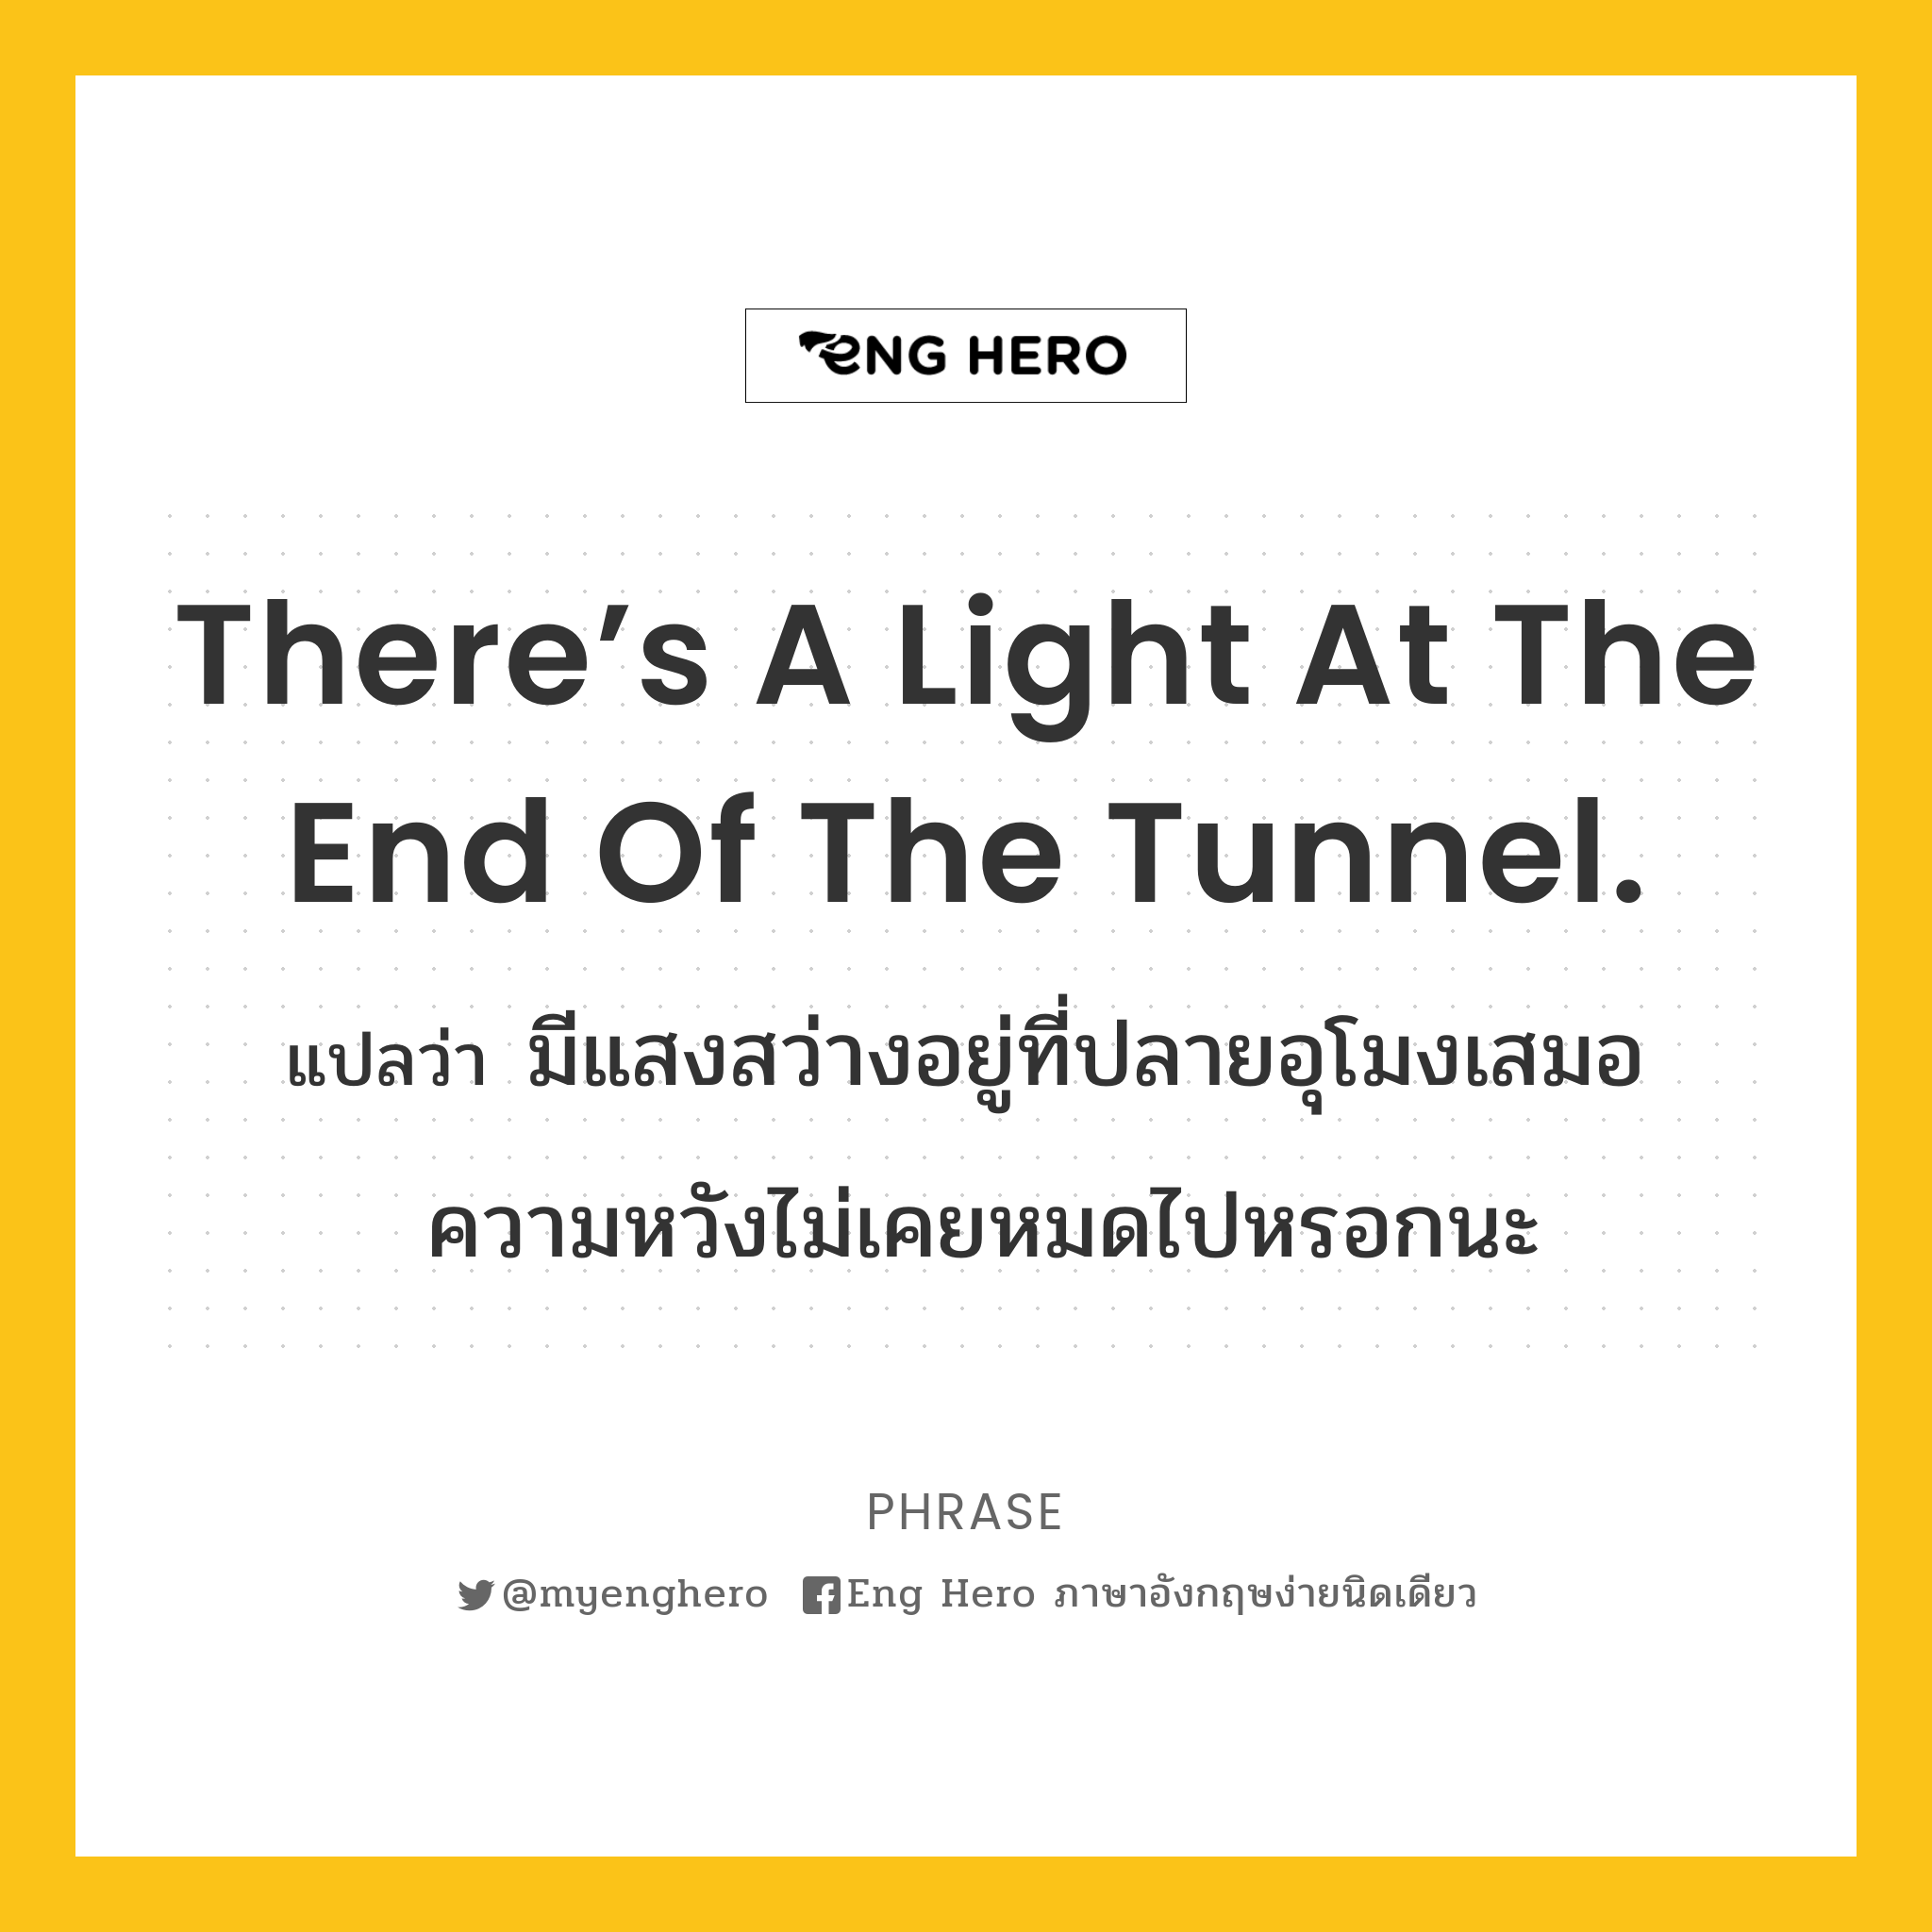 There’s a light at the end of the tunnel.